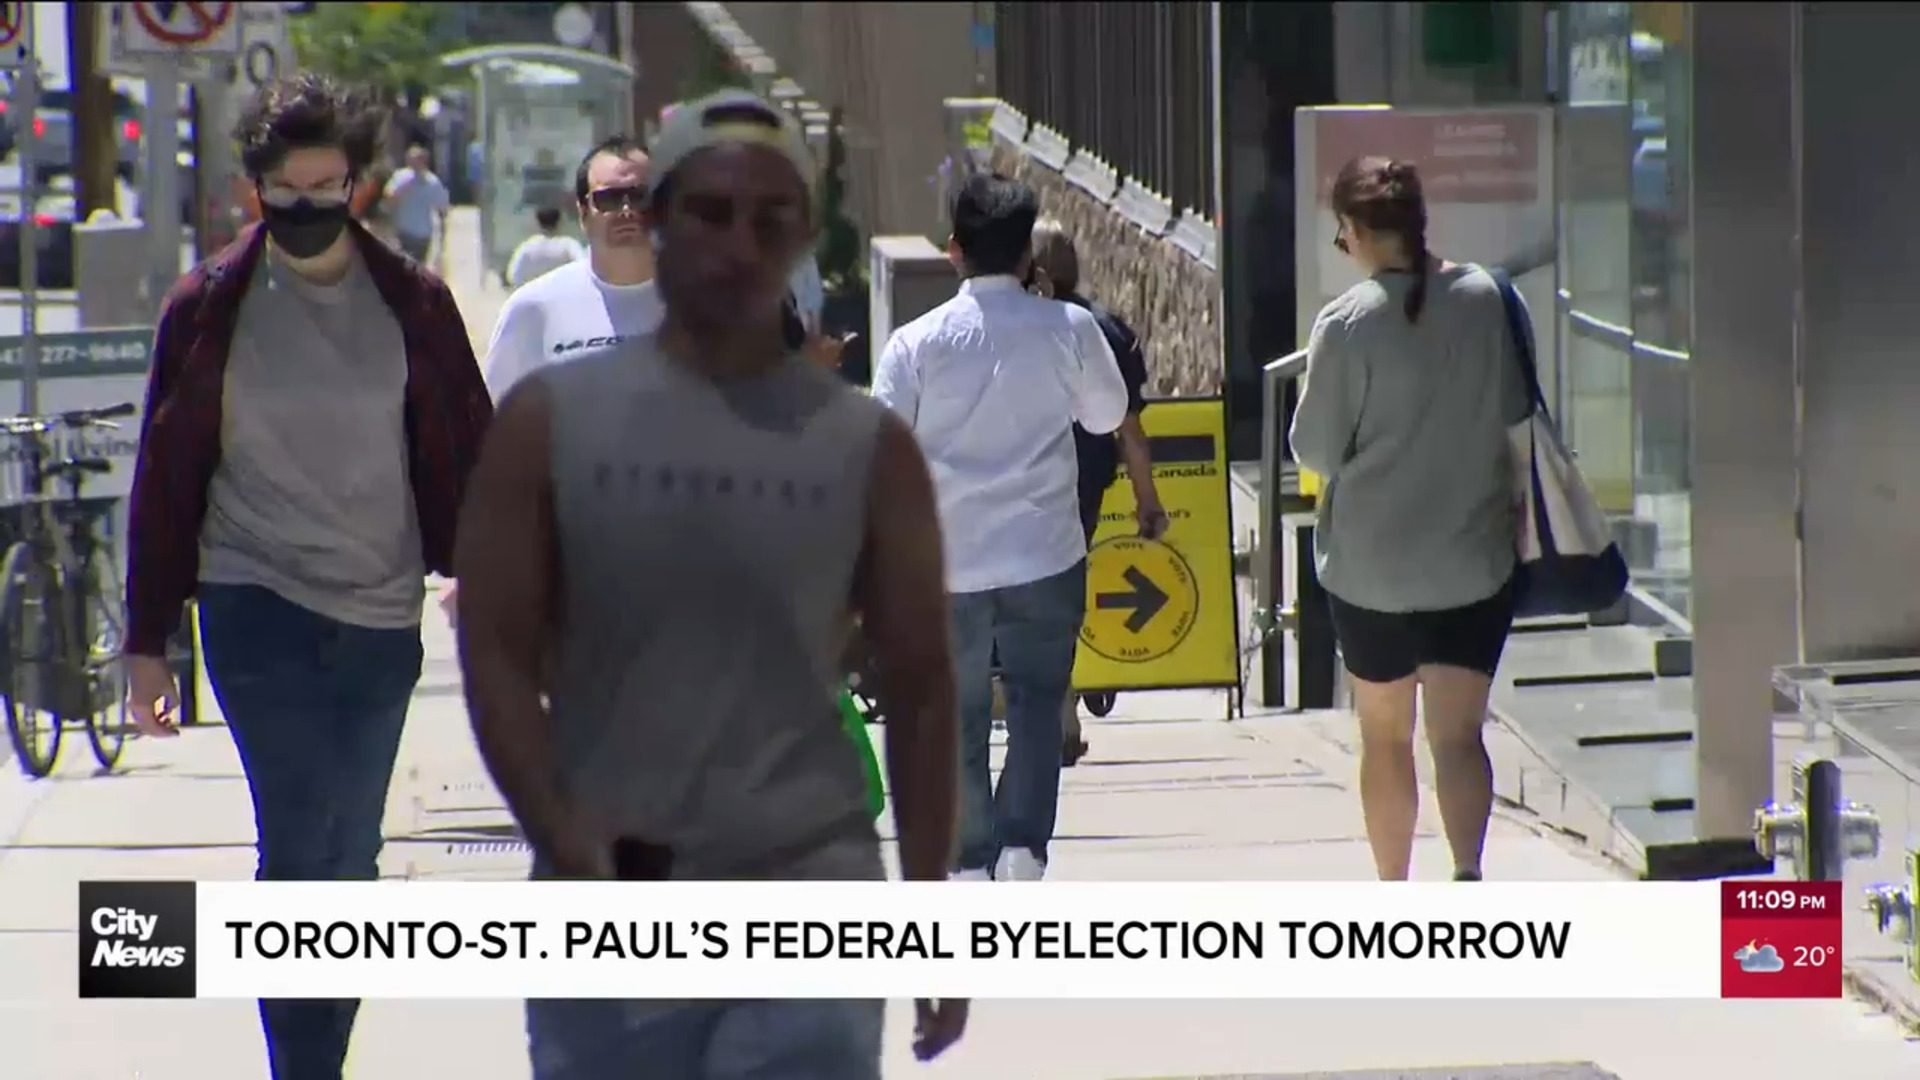 Toronto–St. Paul's federal byelection being held on Monday